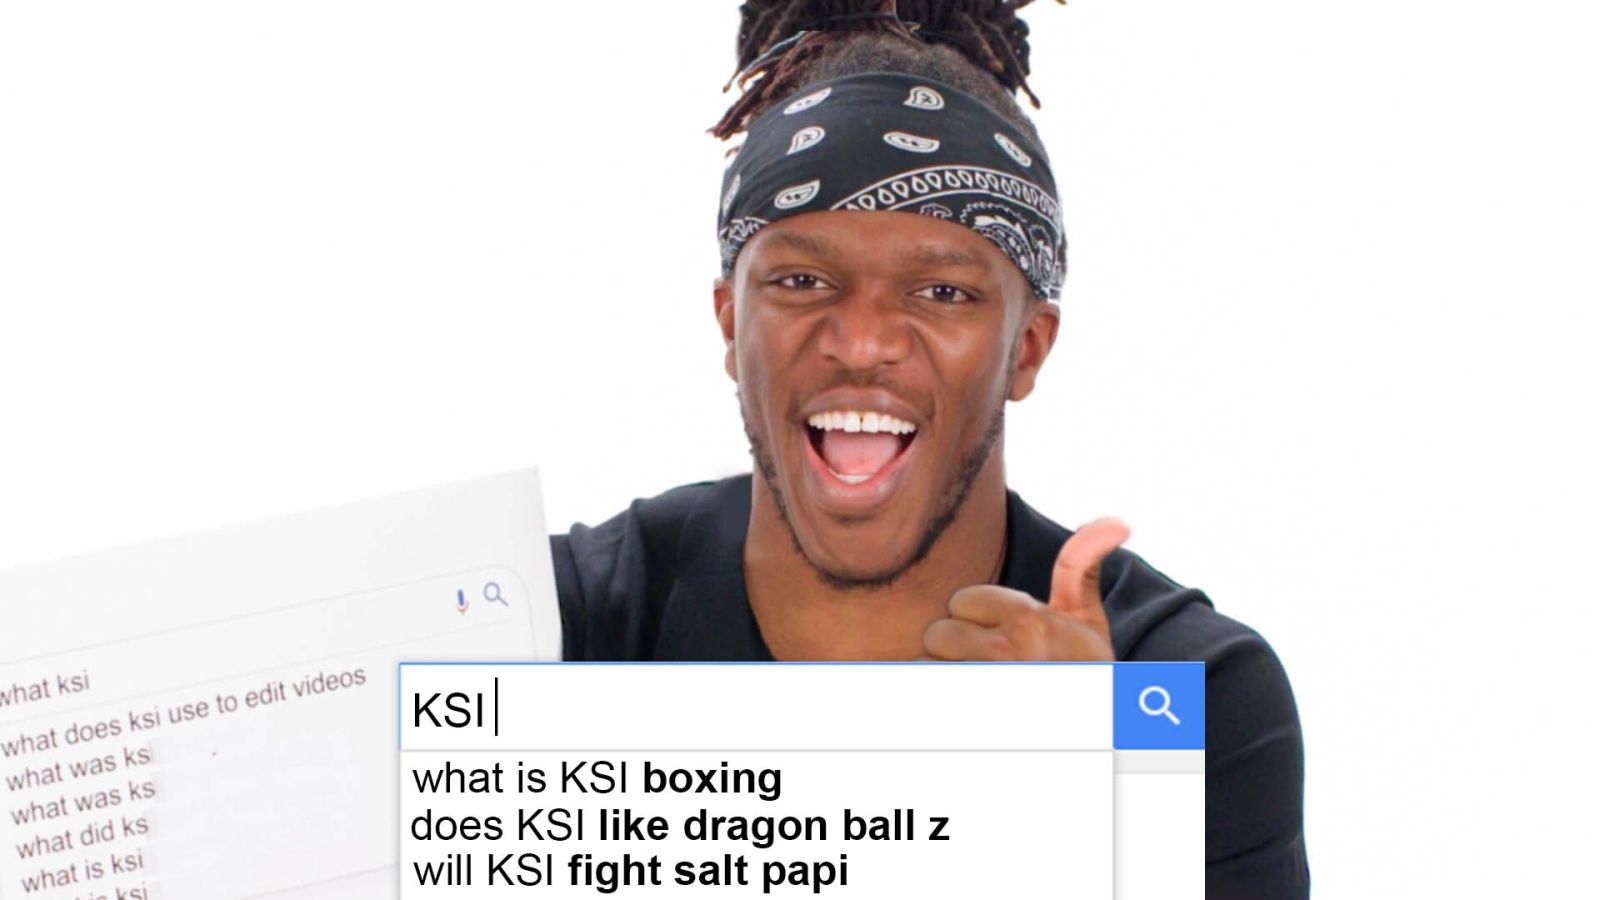 KSI Answers the Web's Most Searched Questions